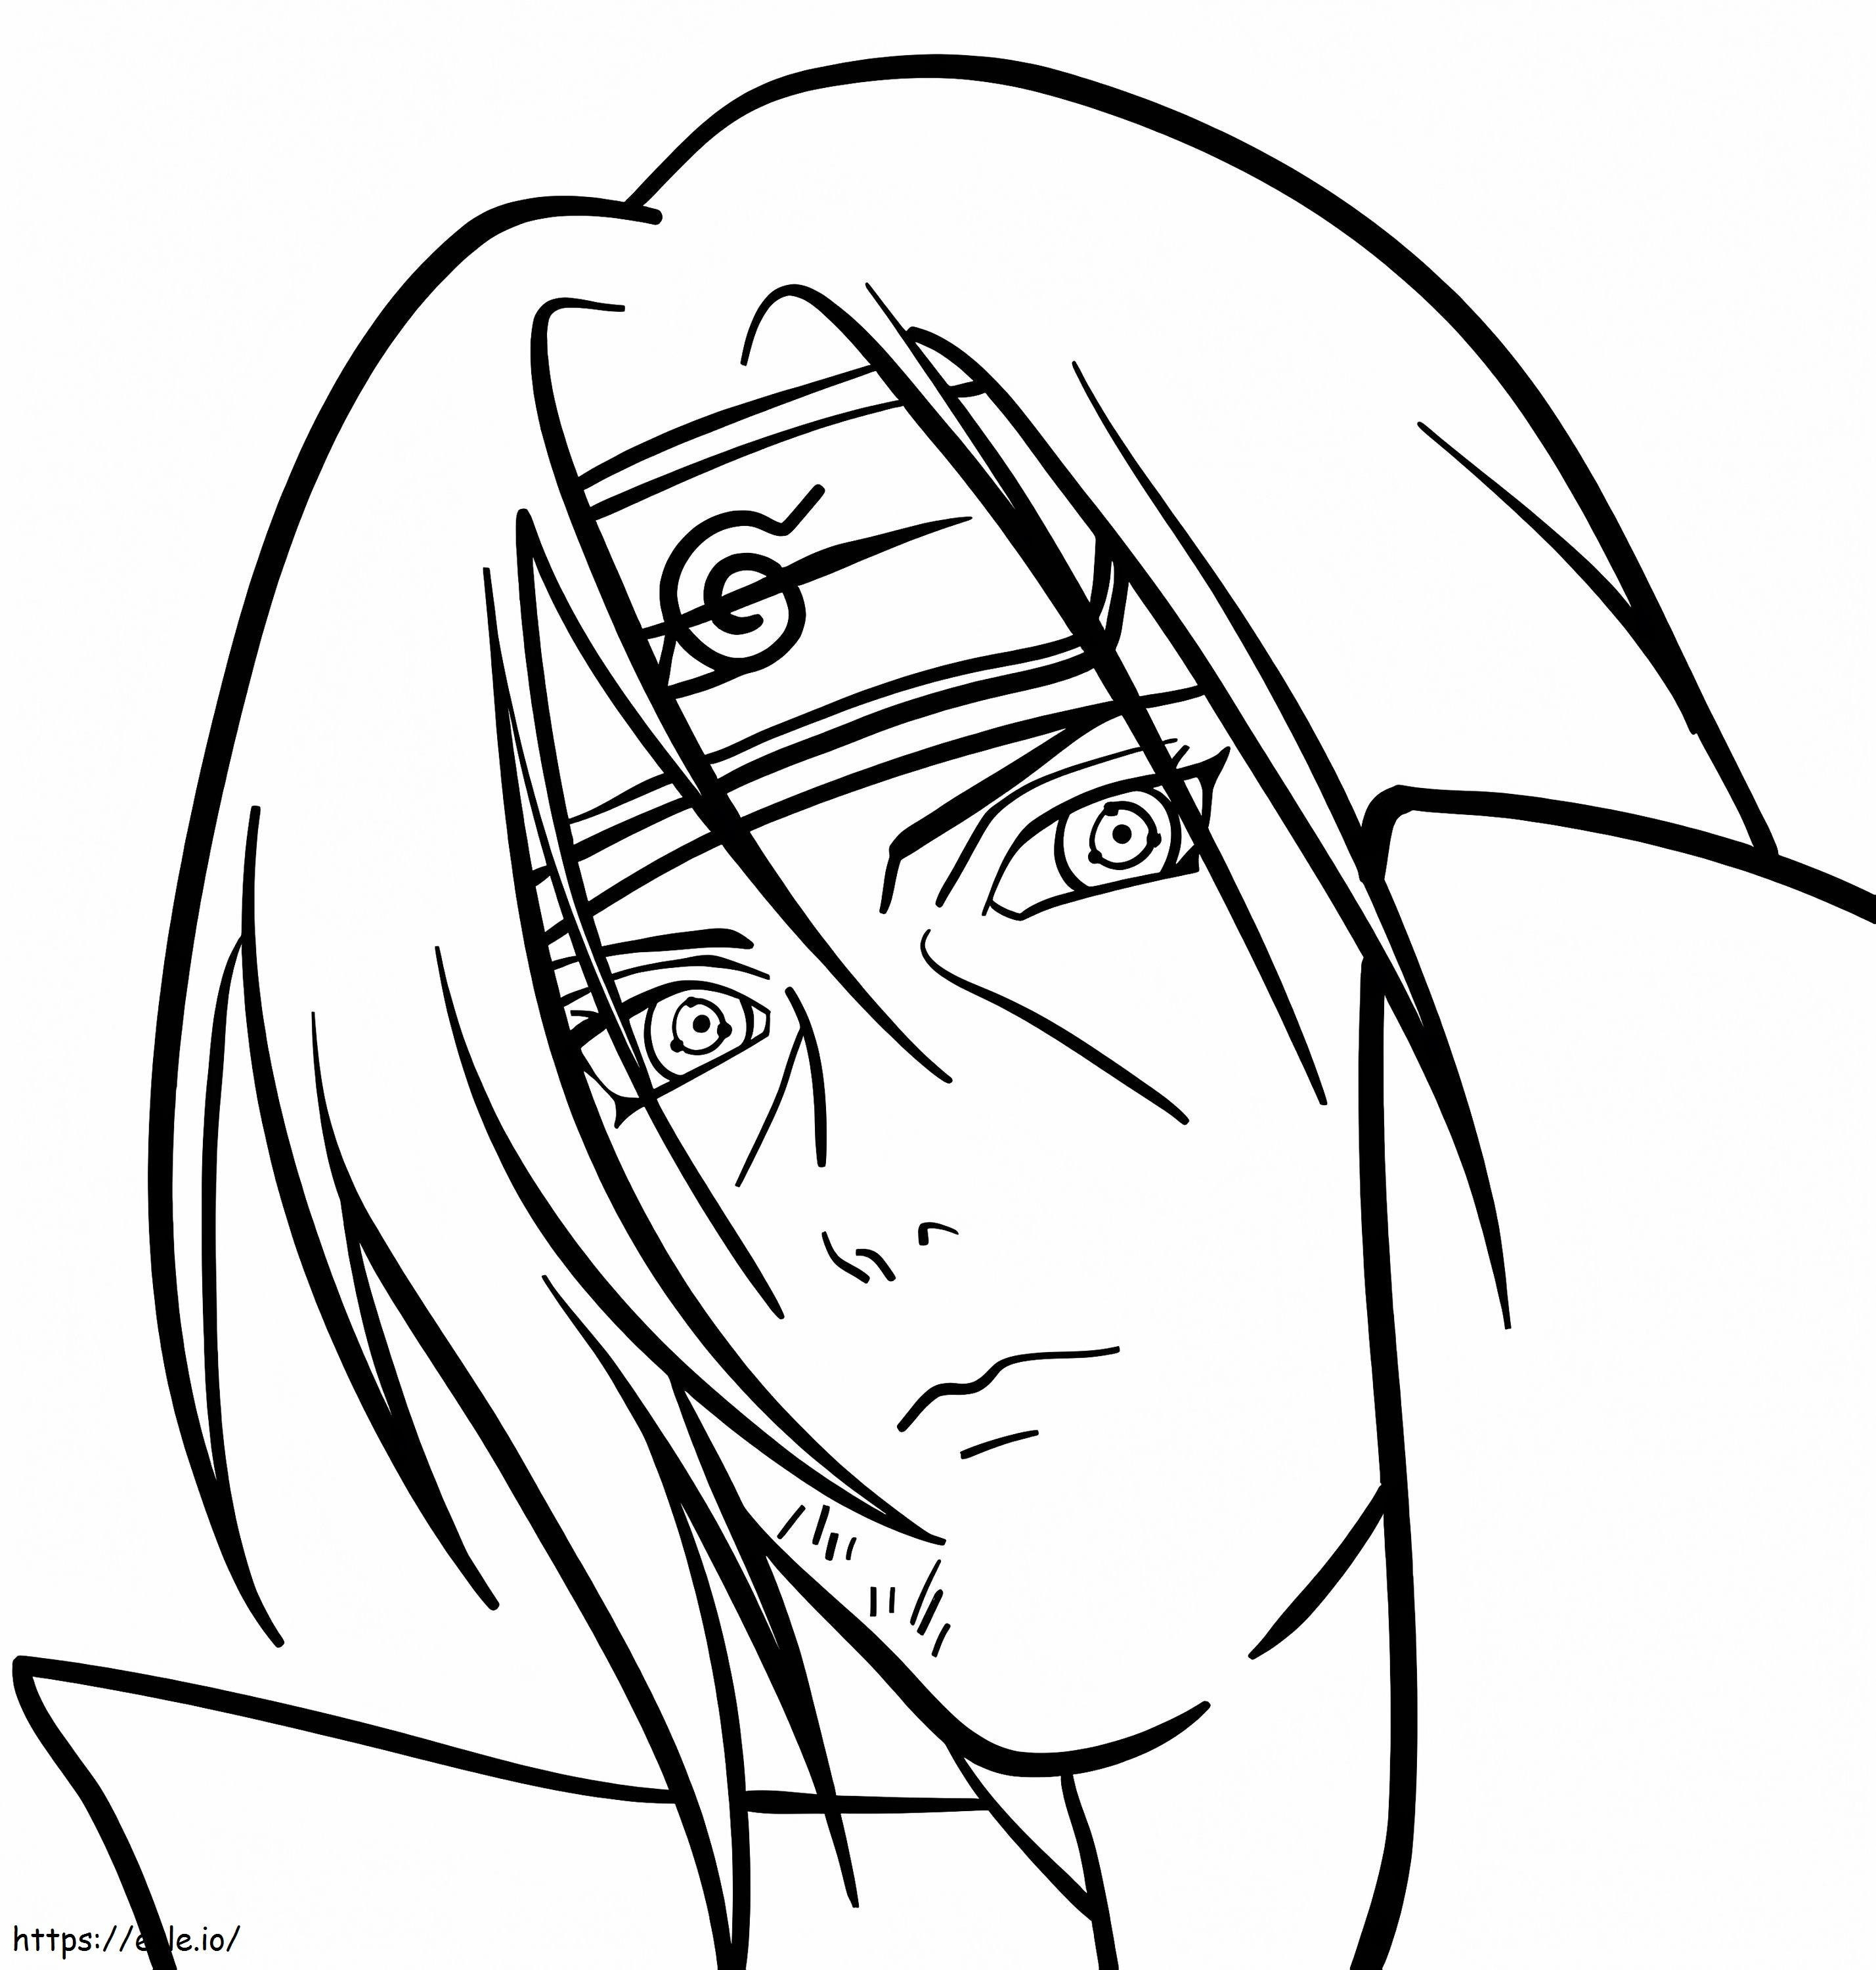 Itachi 16 coloring page